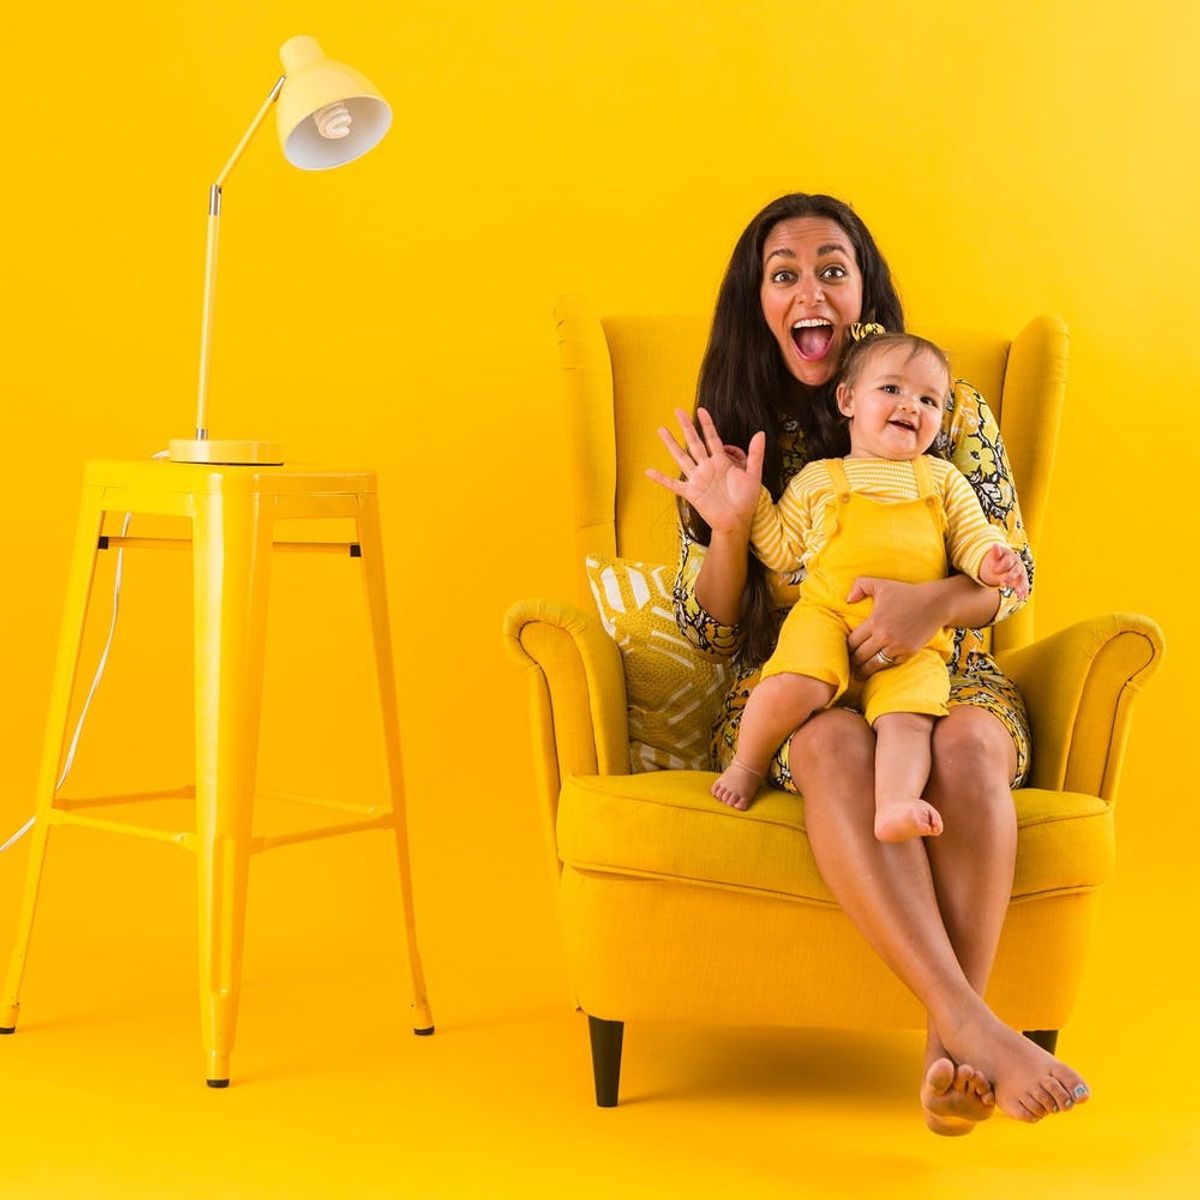 Insta-Inspo: This Mother-Daughter Photoshoot Idea Is Made for Color Lovers